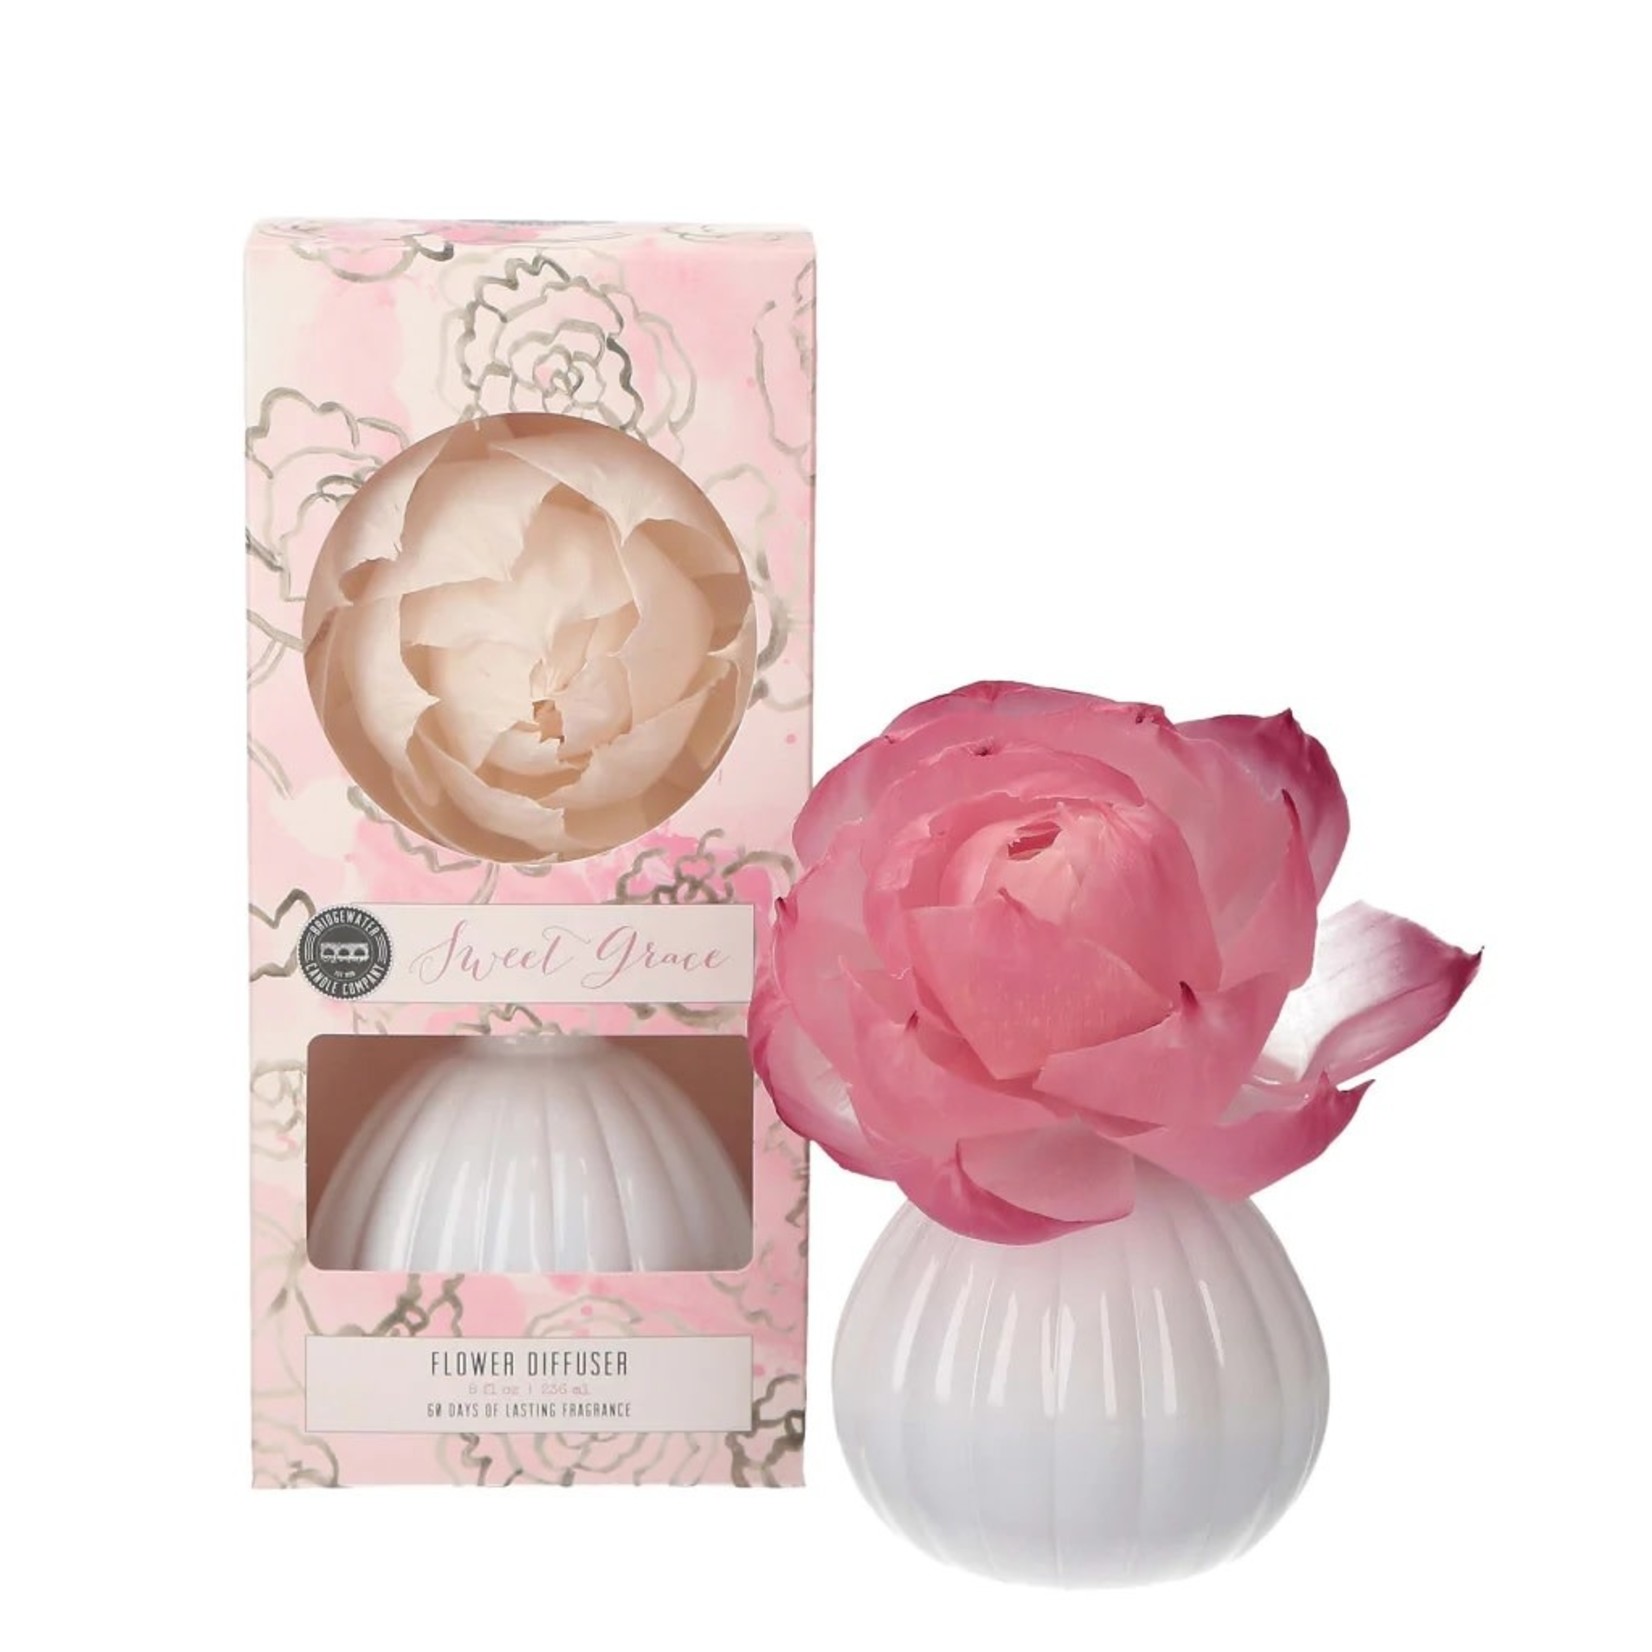 SWEET GRACE SWEET GRACE FLOWER DIFFUSERS - Southern Accents MS